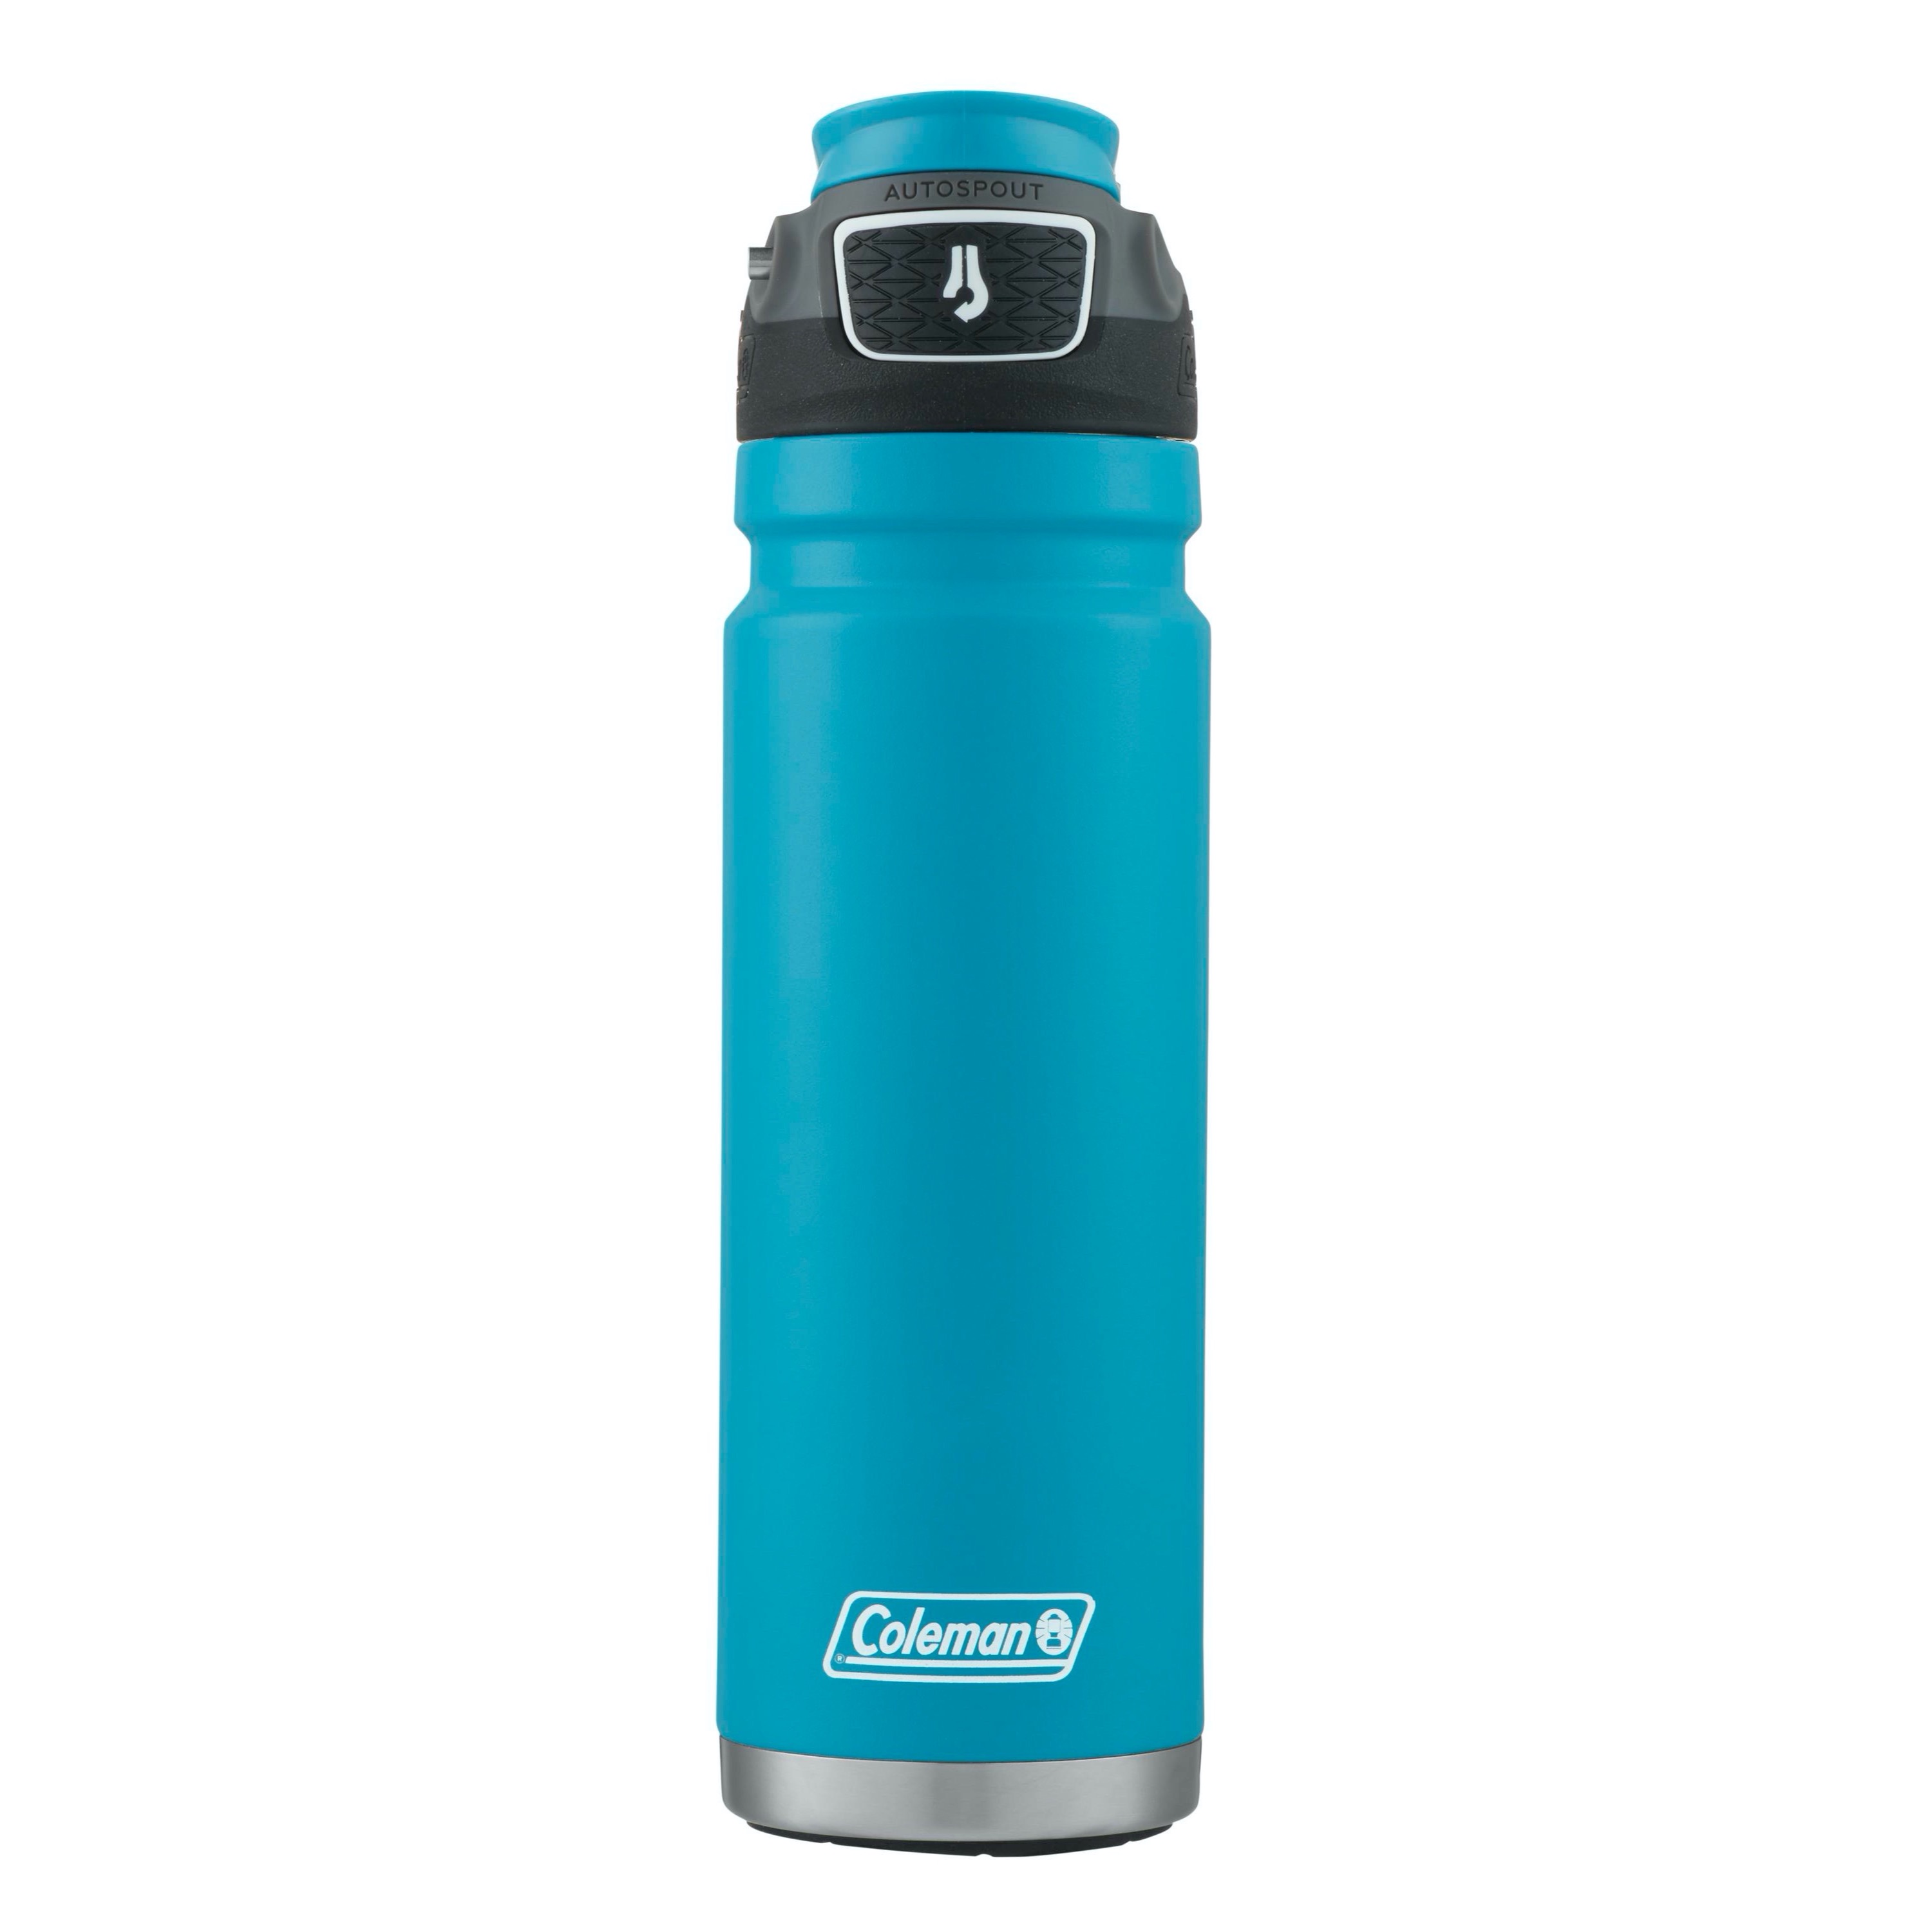 Coleman Stainless Steel Straw Water Bottle, Caribbean Sea, 24 Oz. - image 2 of 6